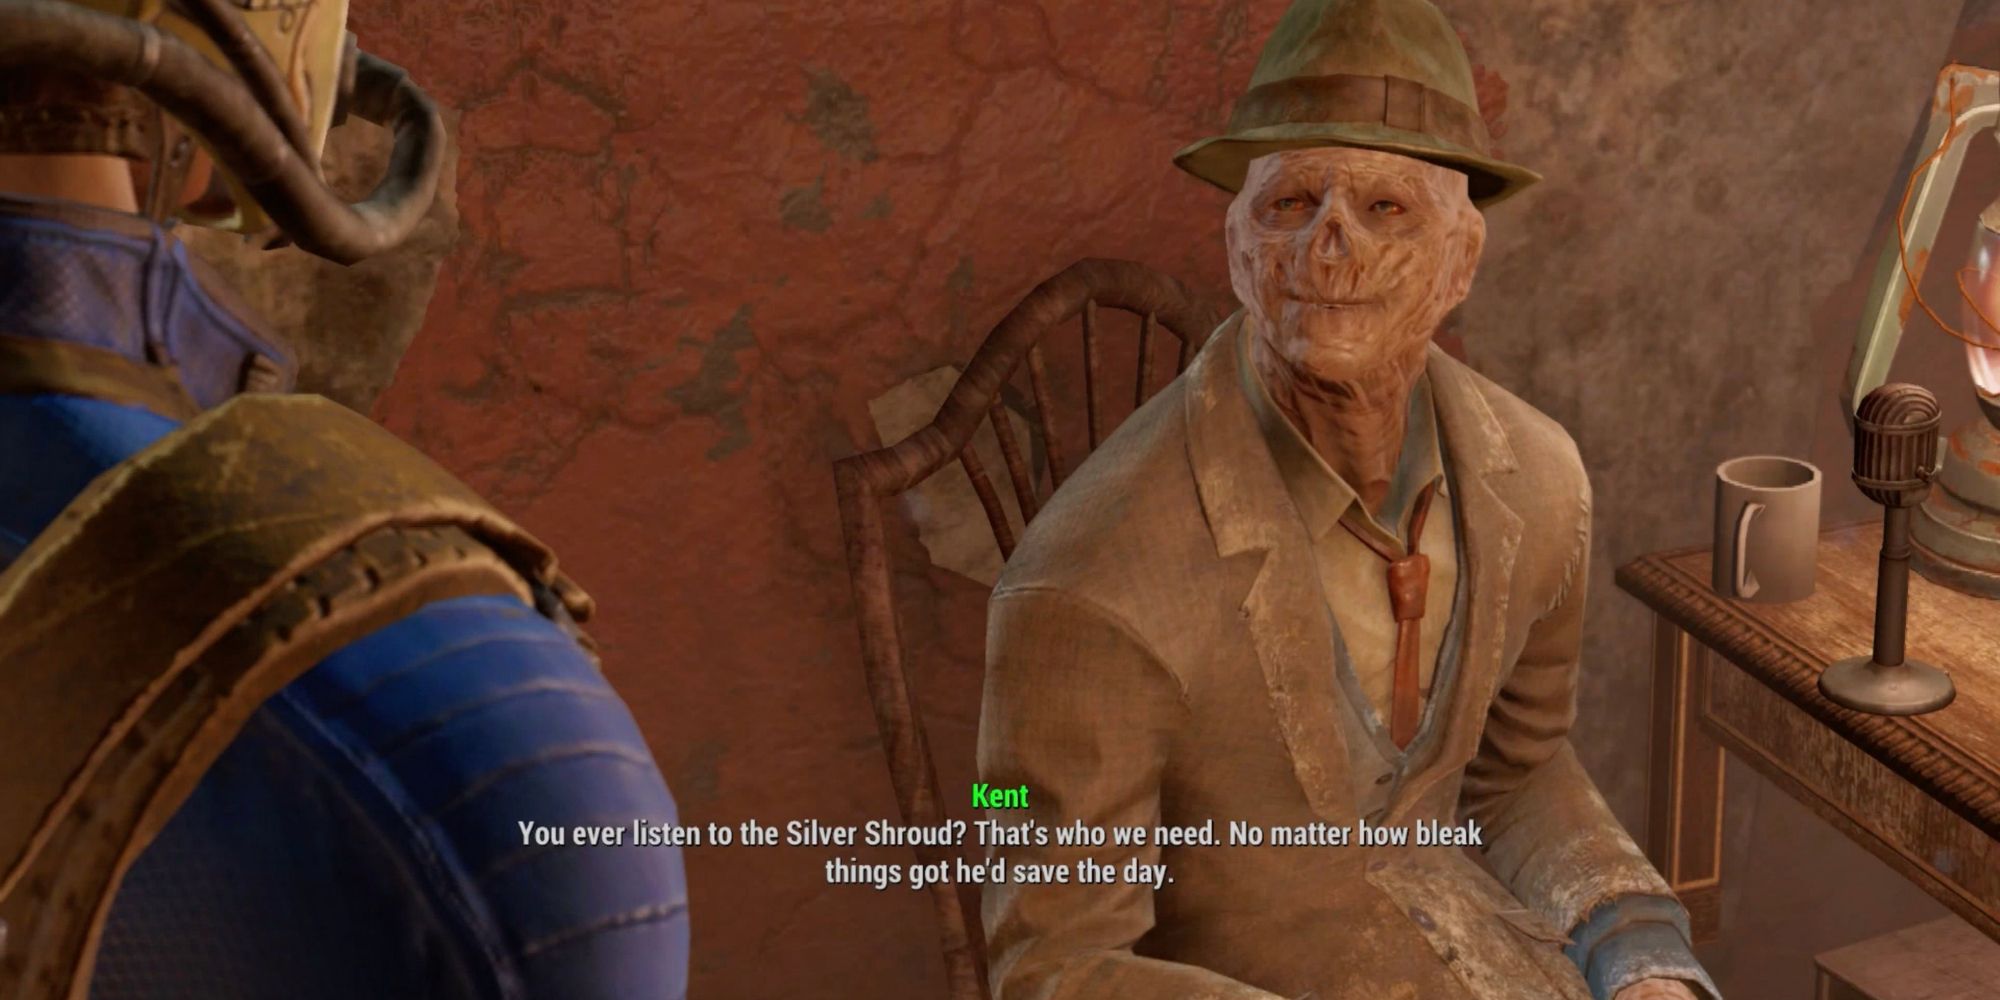 Fallout 4 - Kent Connelly in Goodneighbor talking about The Silver Shroud